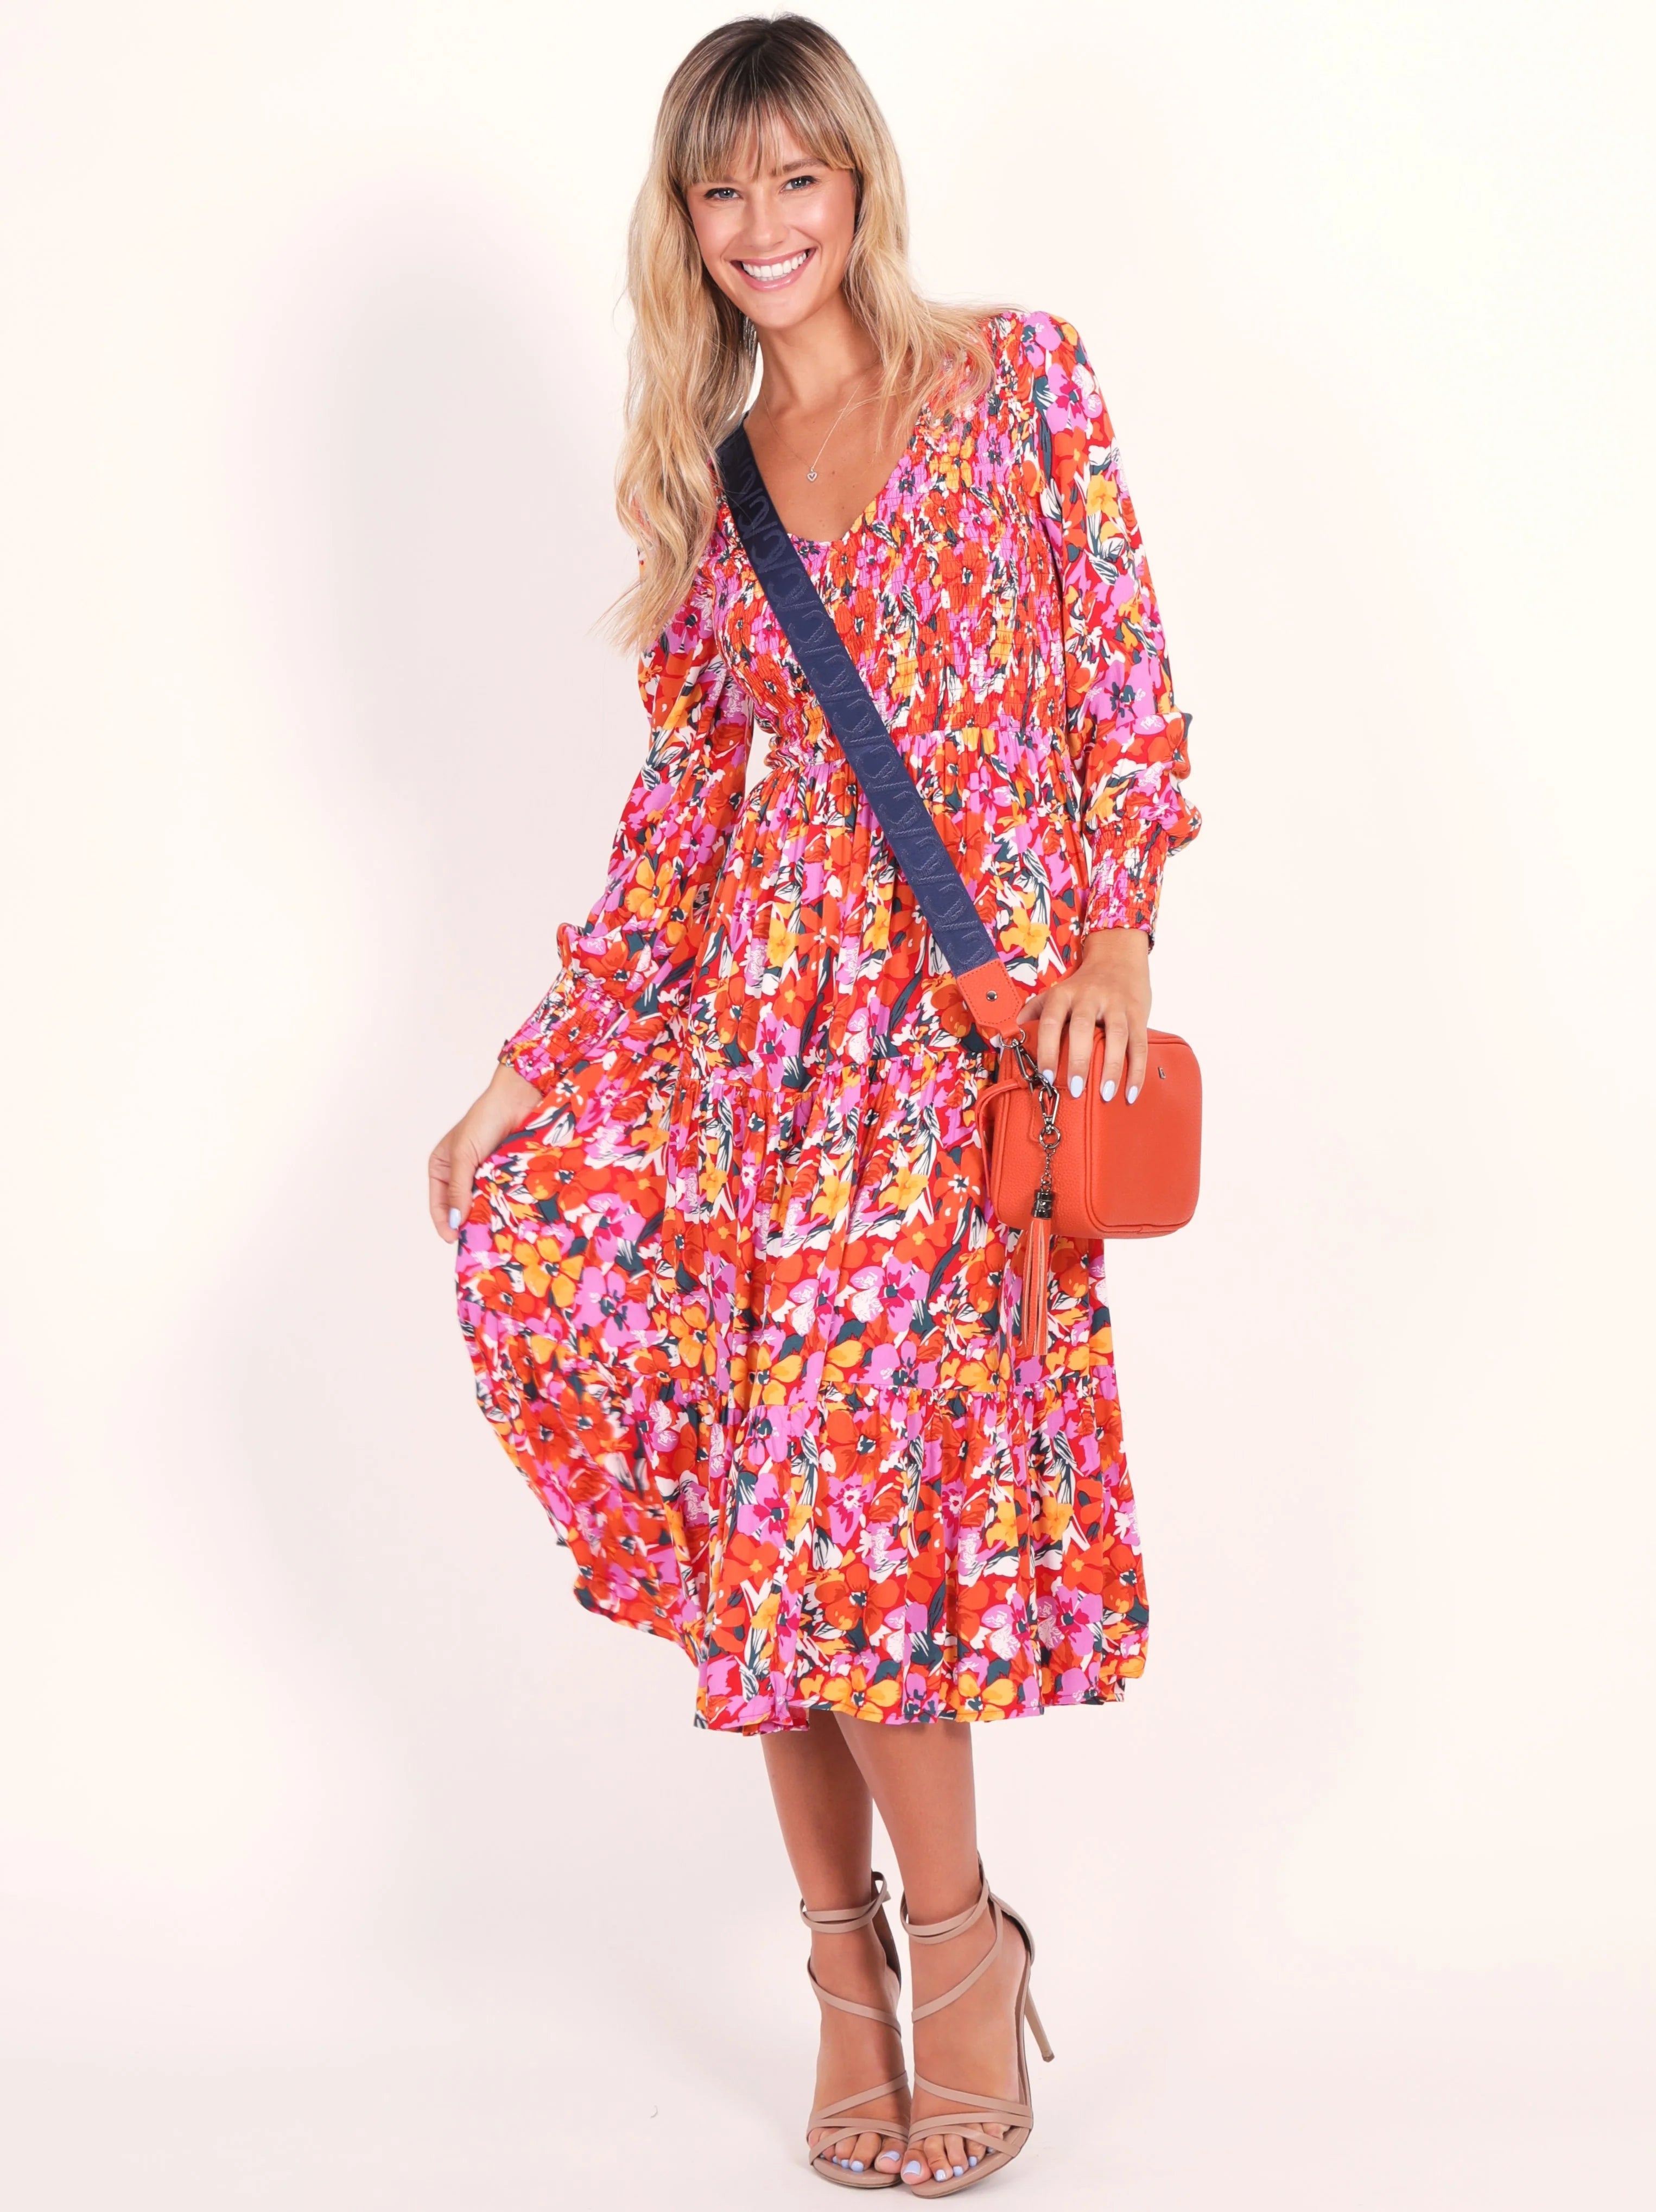 Phoenix Dress (Pink Floral) - Something For Me​​